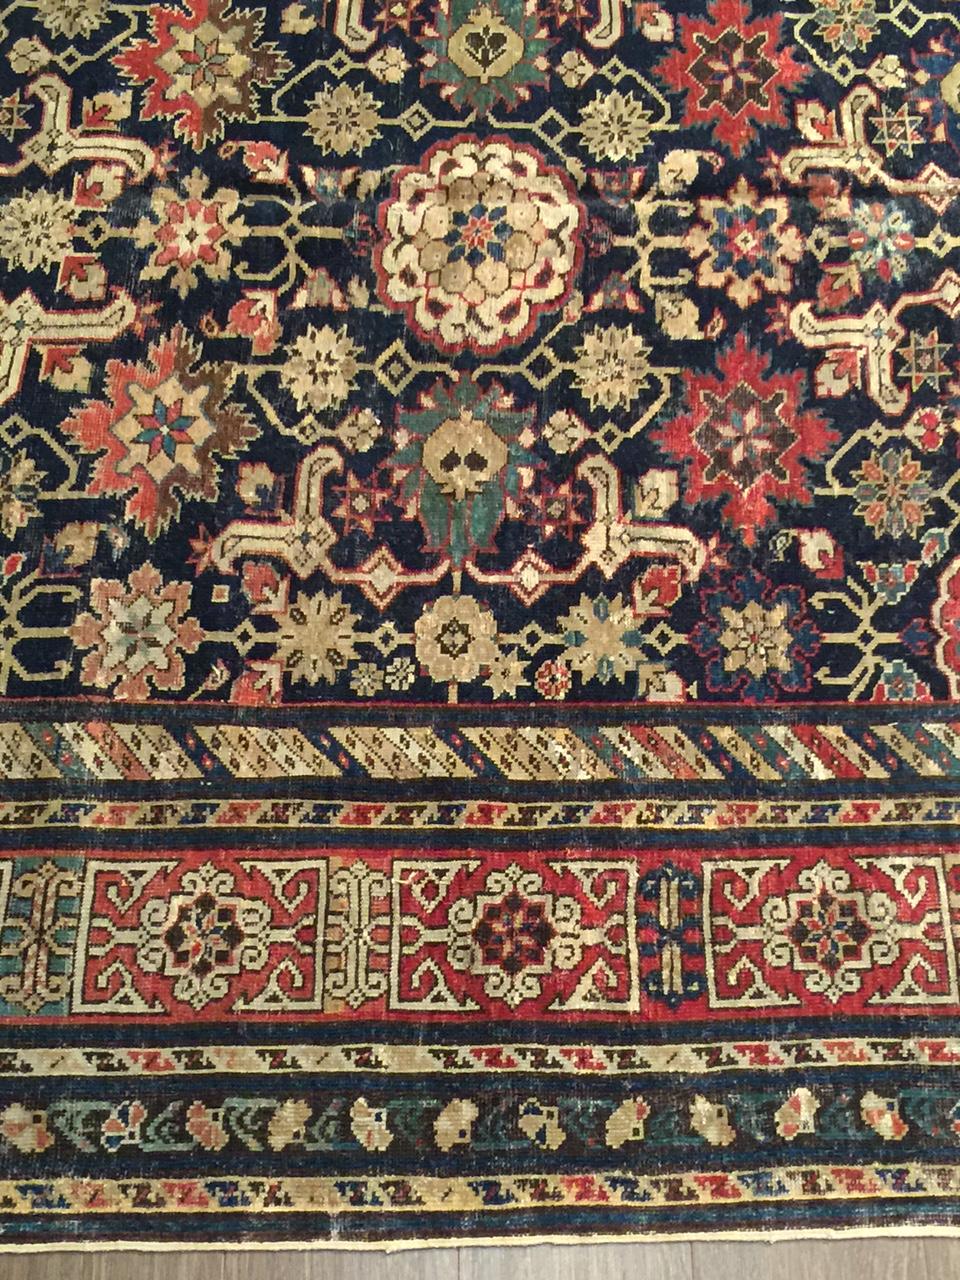 Antique Caucasian Kuba Shirvan Runner Rug, 4'11 x 12'11 In Good Condition For Sale In New York, NY